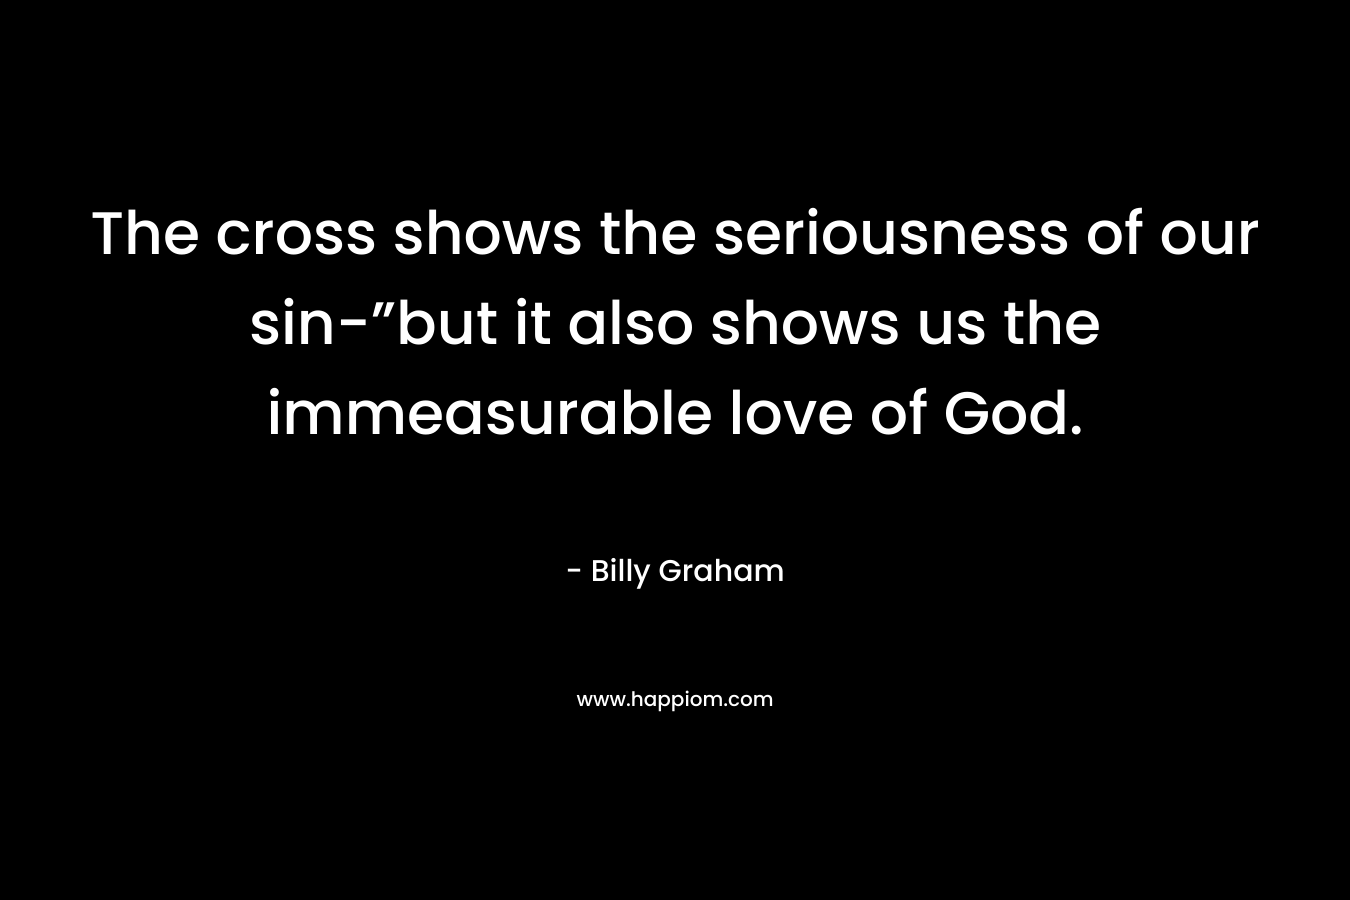 The cross shows the seriousness of our sin-”but it also shows us the immeasurable love of God. – Billy Graham